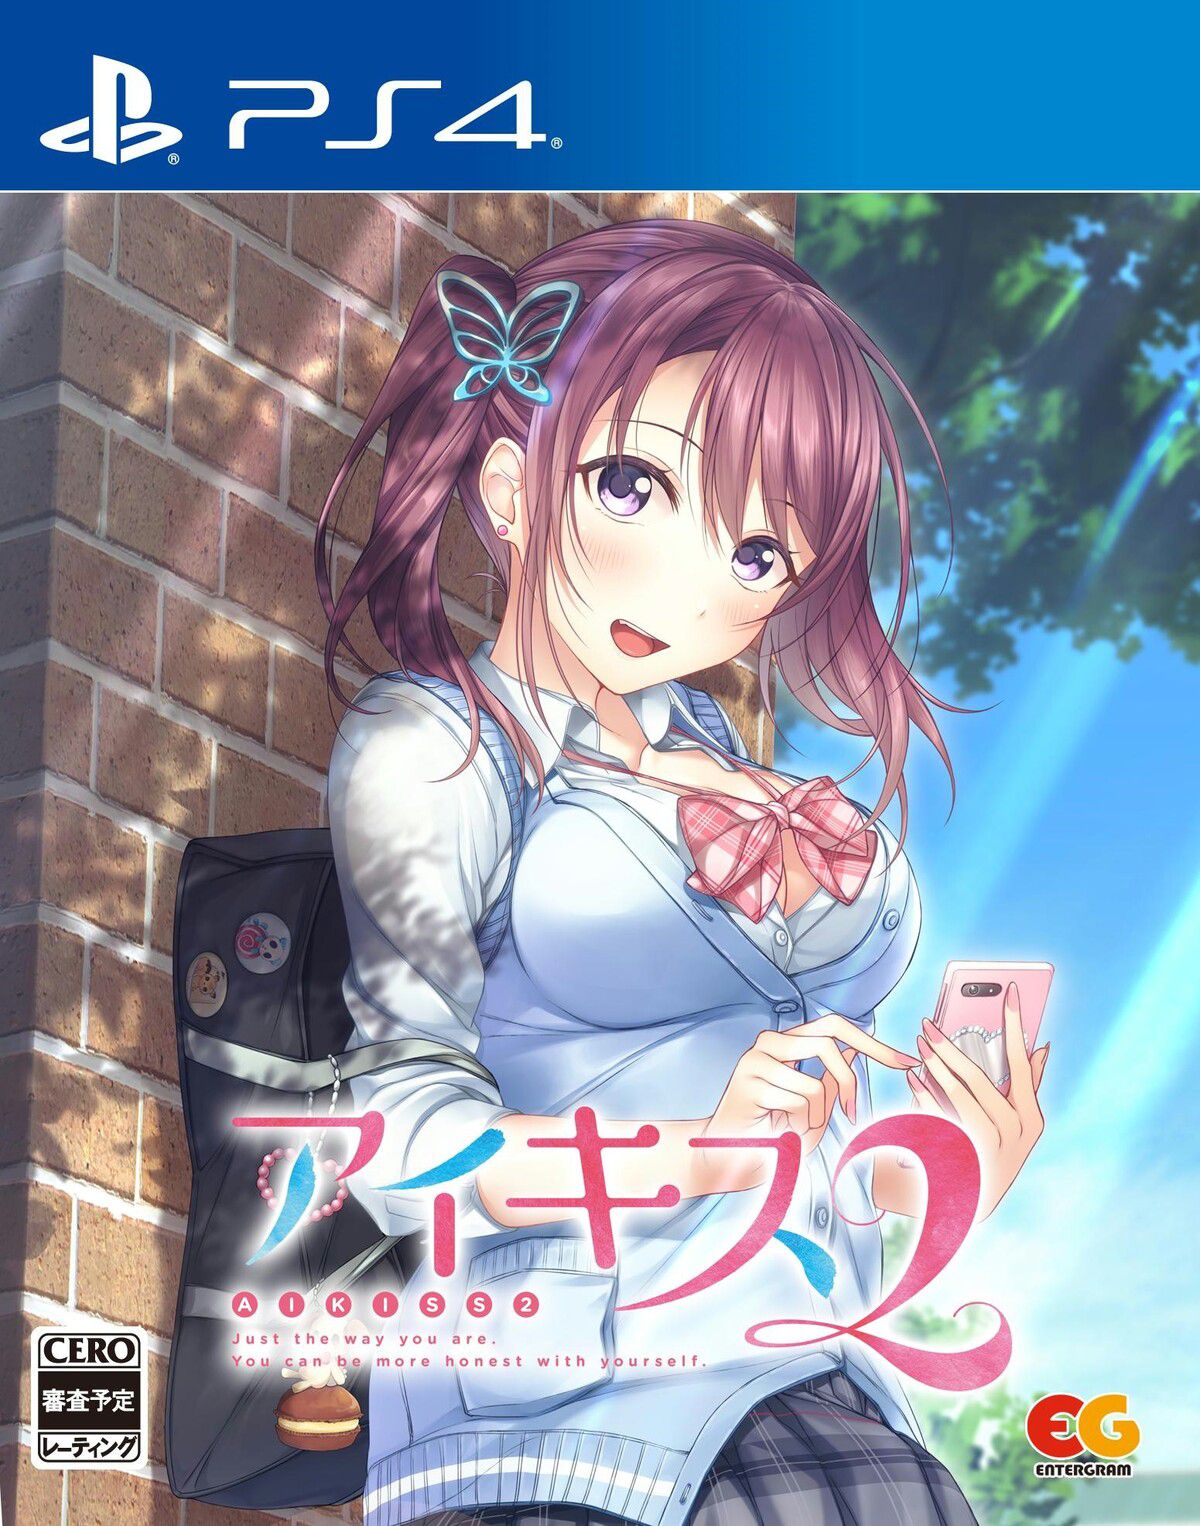 PS4 / switch version [Aikis 2] erotic event CG such as girl's skirt raise and swimsuit 2